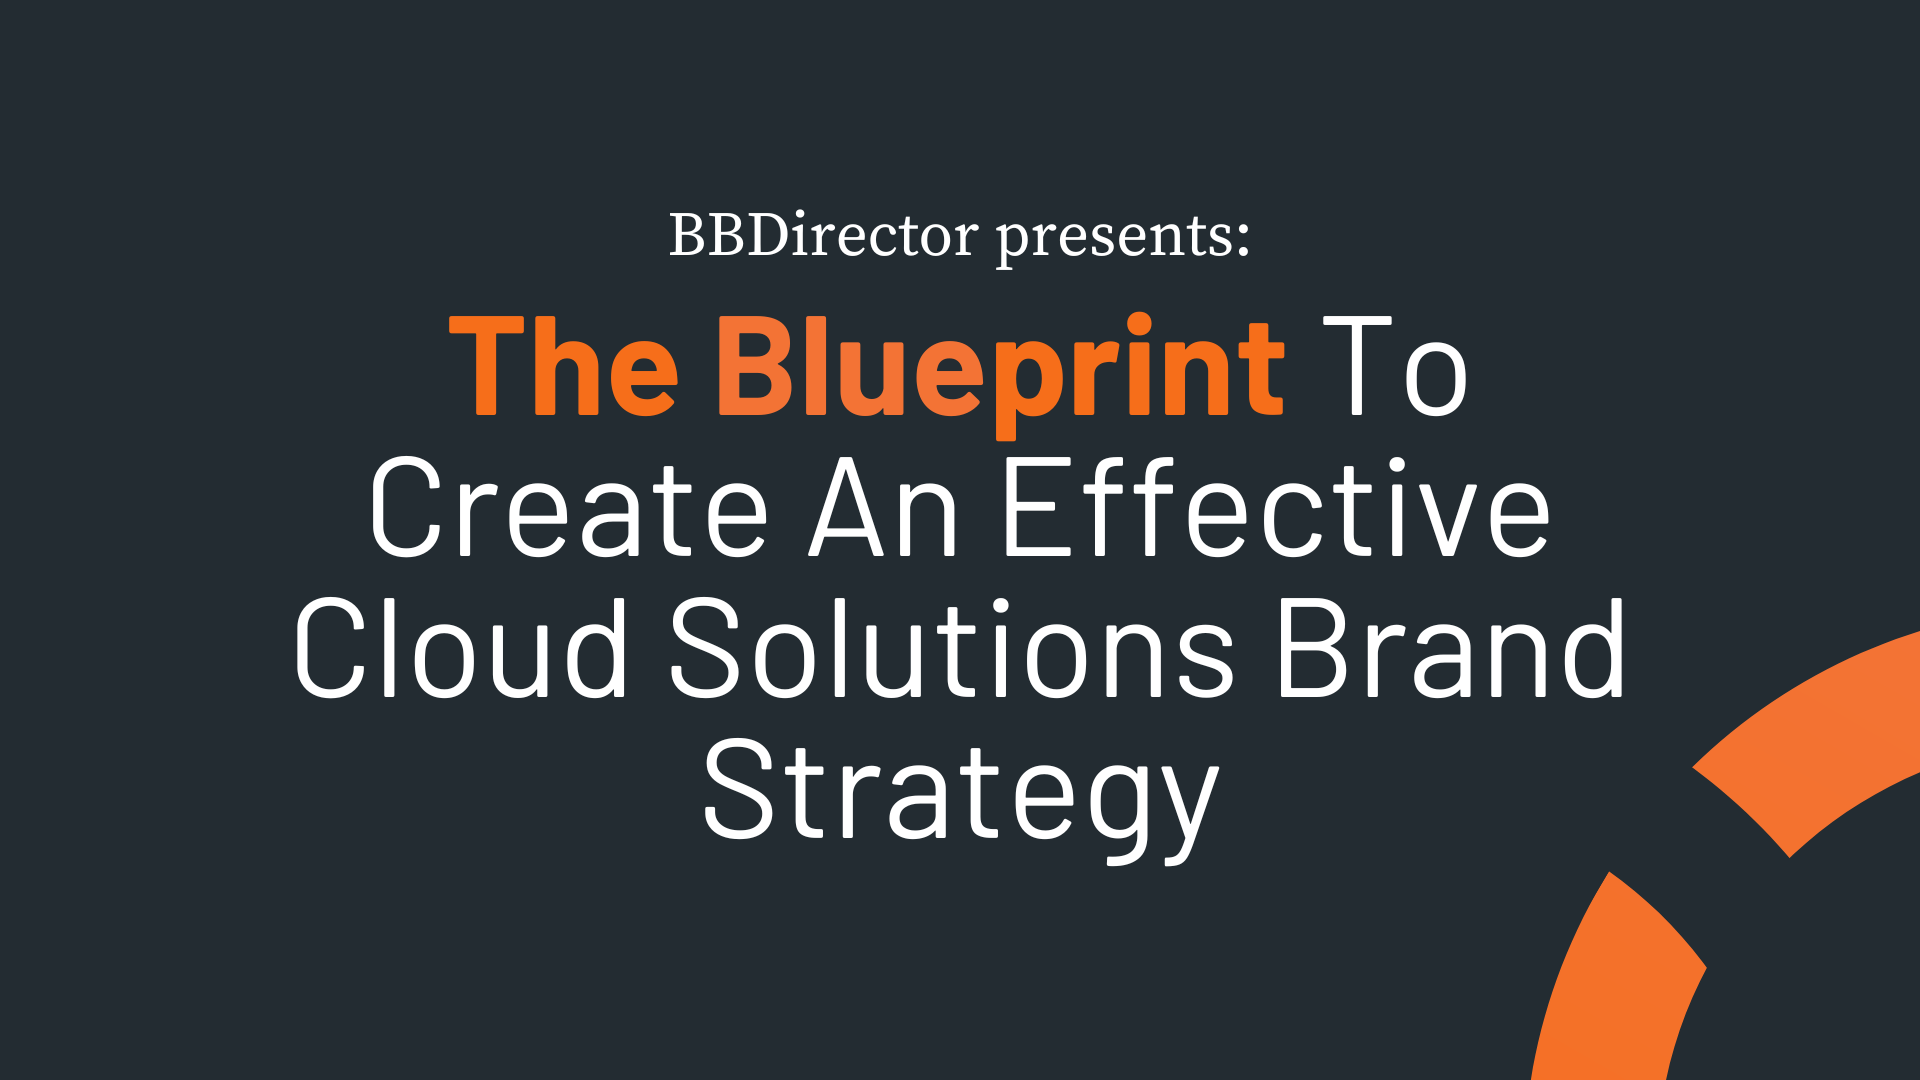 Cloud Solutions Brand Strategy Guide